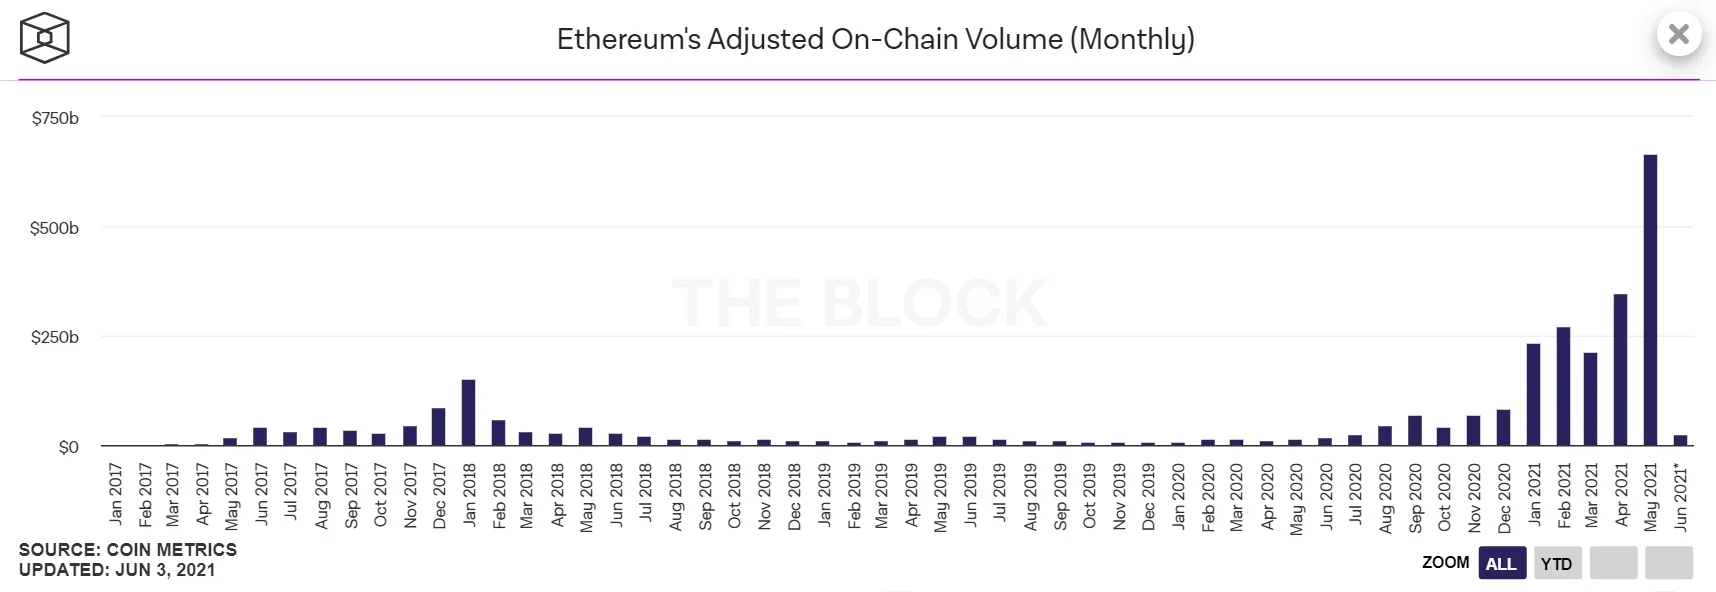 Ethereum's Adjusted On-Chain Volume (Monthly)